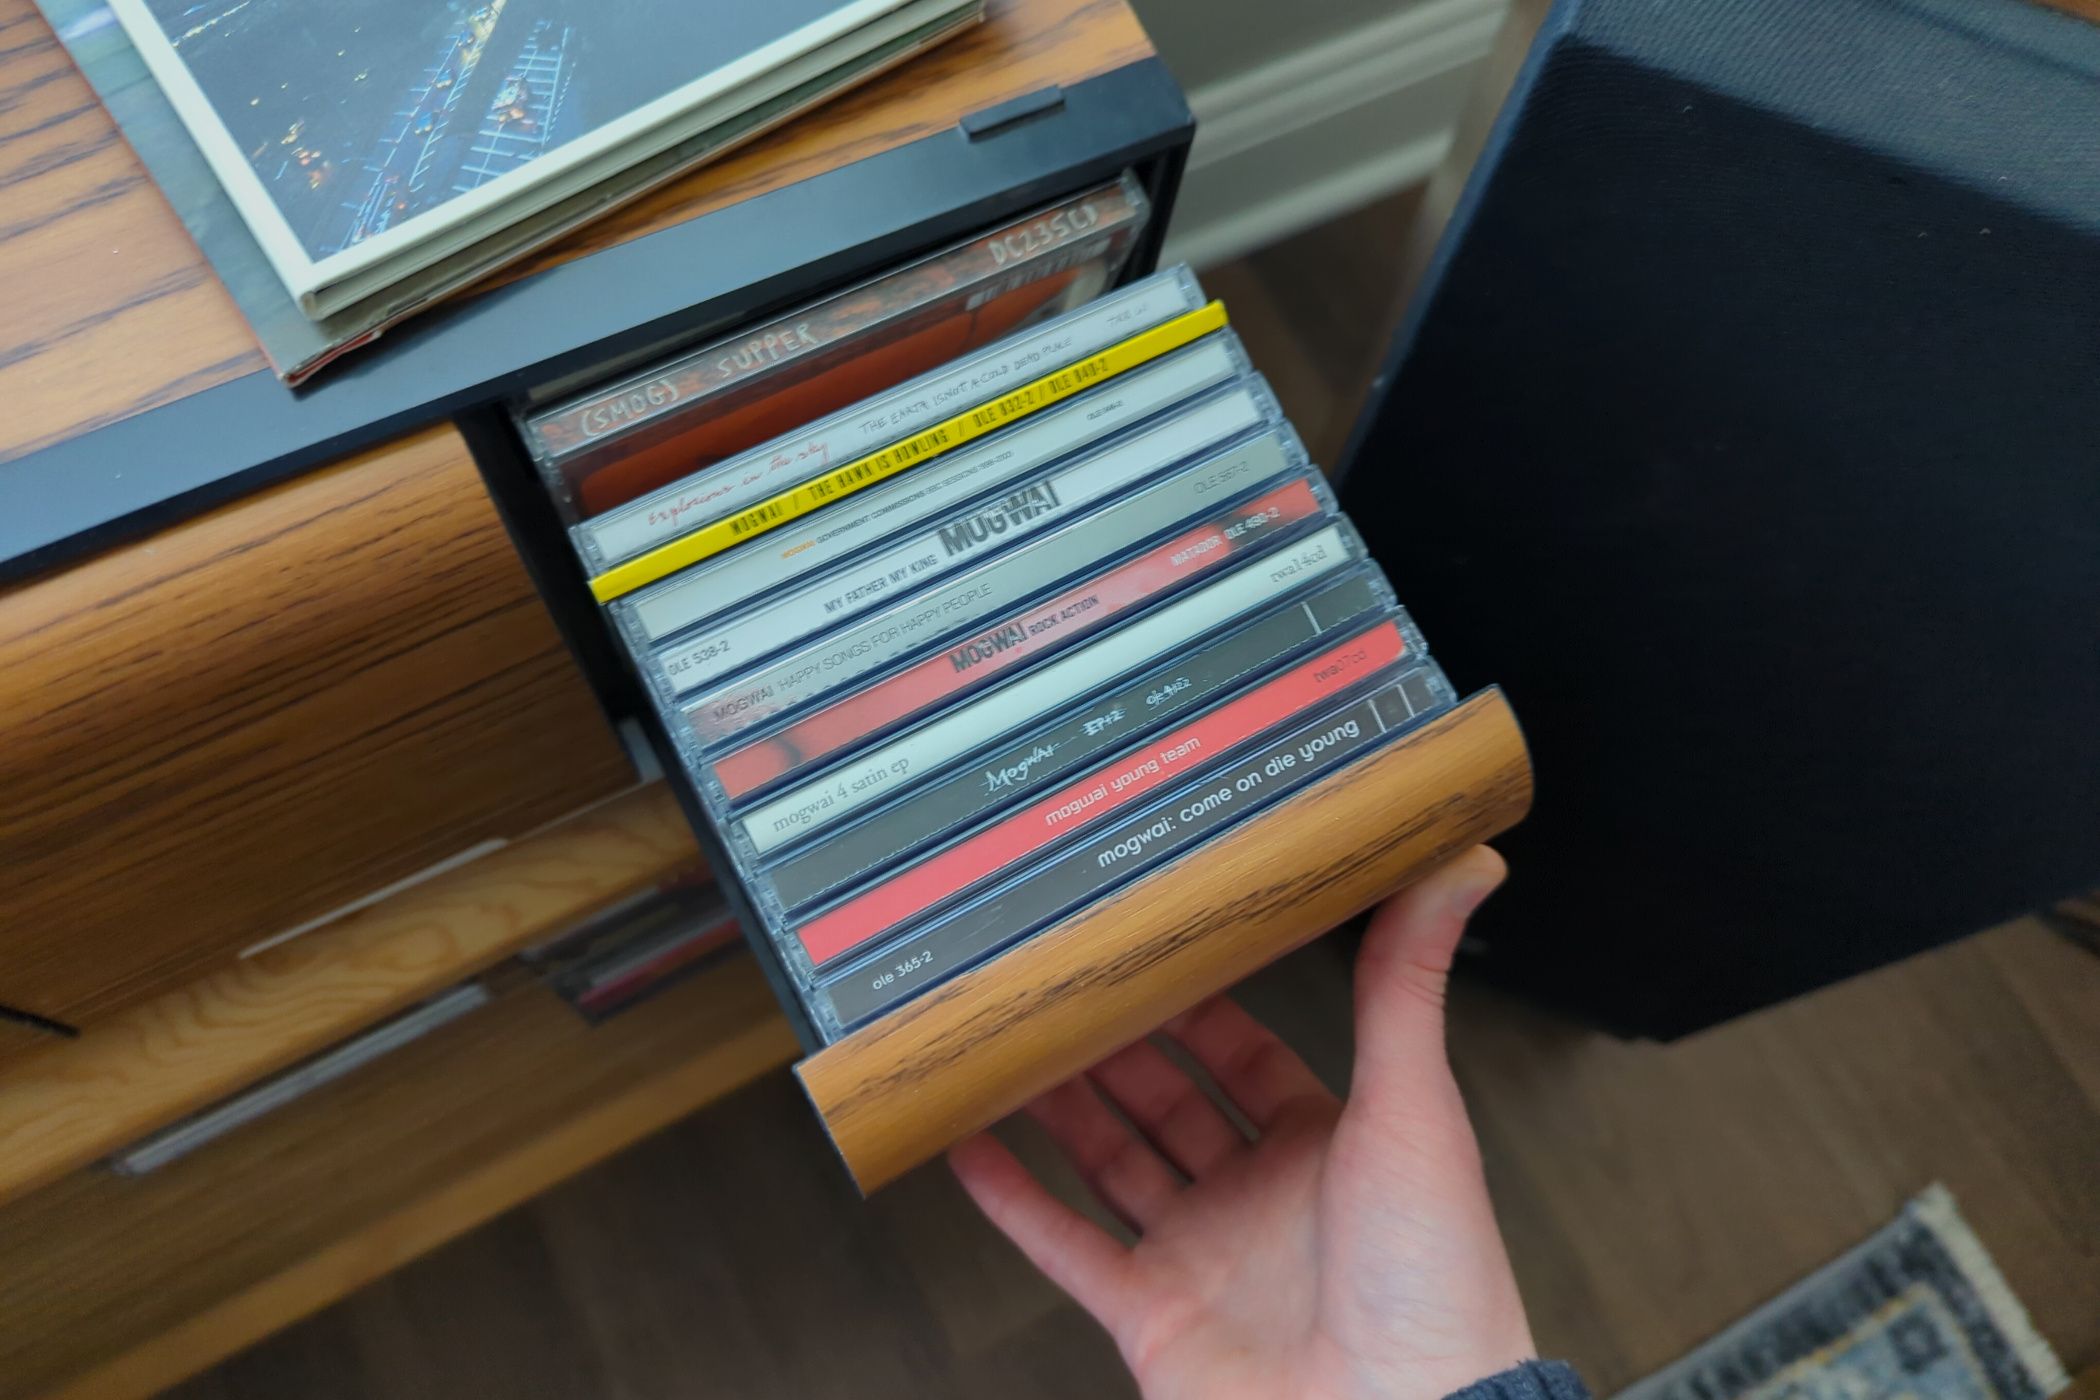 A hand pulls open a drawer full of assorted CD jewel cases.